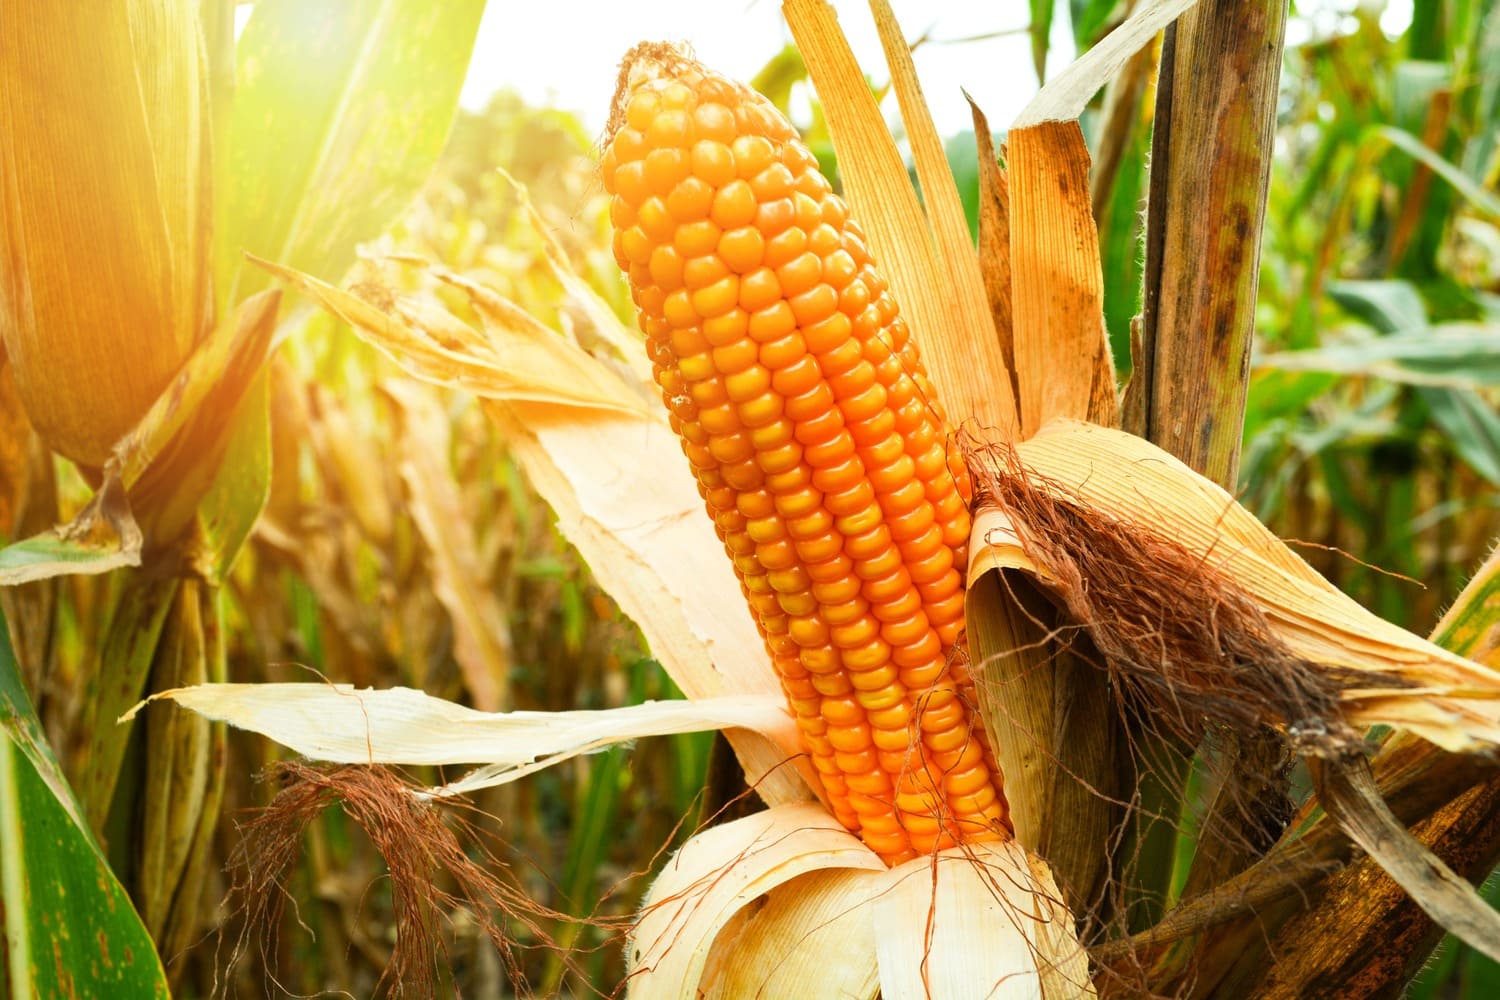 Brazil is getting closer to becoming the world's largest corn exporter